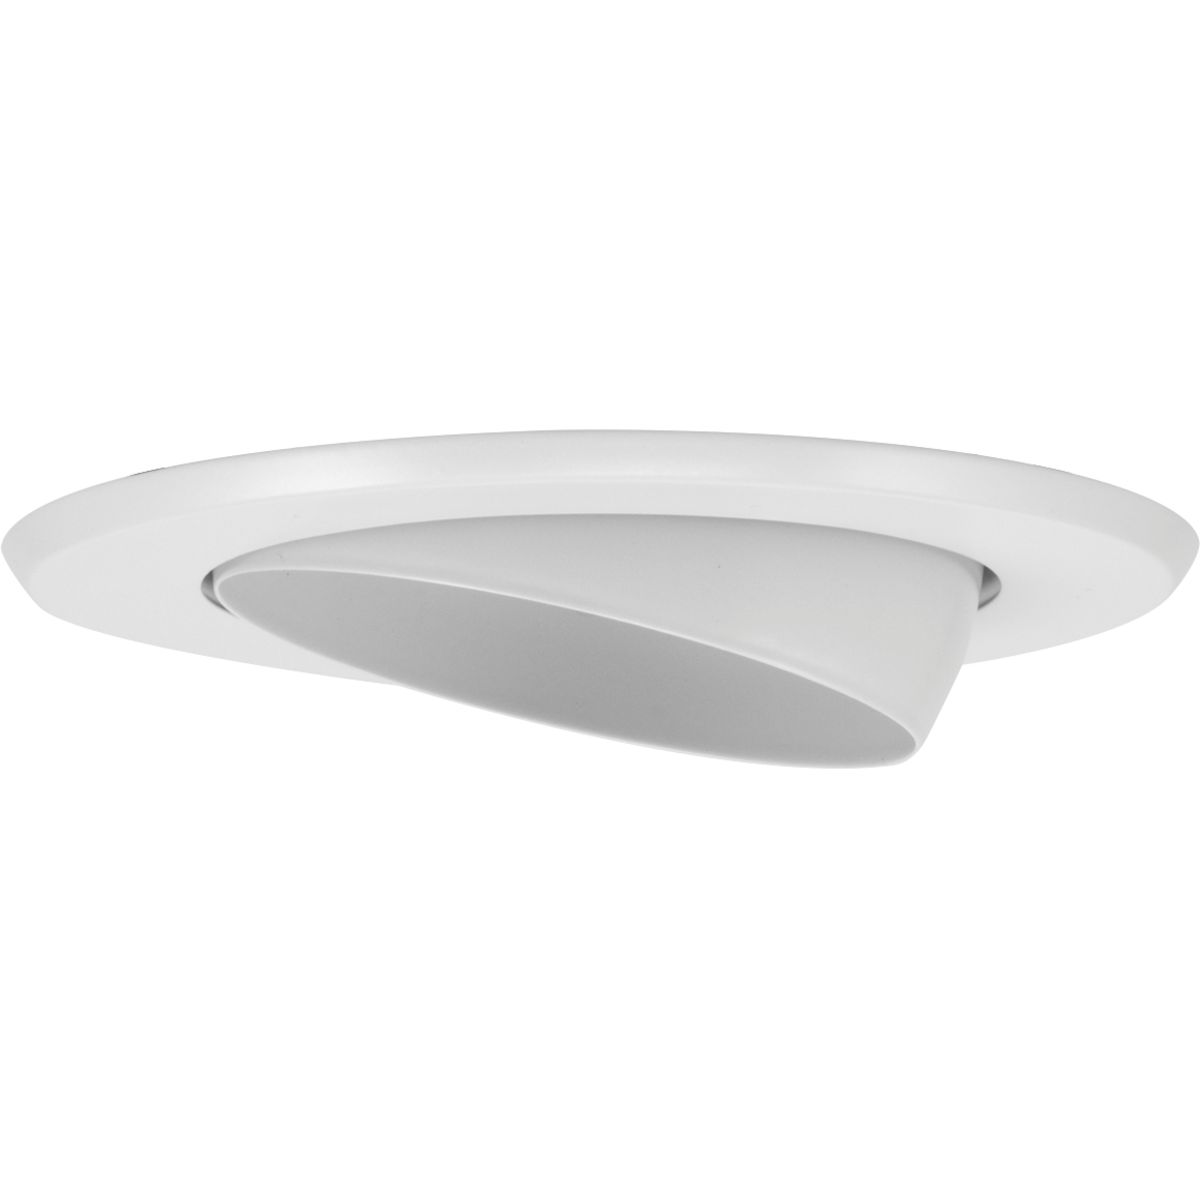 5 inch recessed is ideal for new construction residential applications. It can also be used in most light commercial applications. The white step baffle trim use a friction springs to attach to the housing (P851-ICAT) to provide a flush fit against the ceiling.